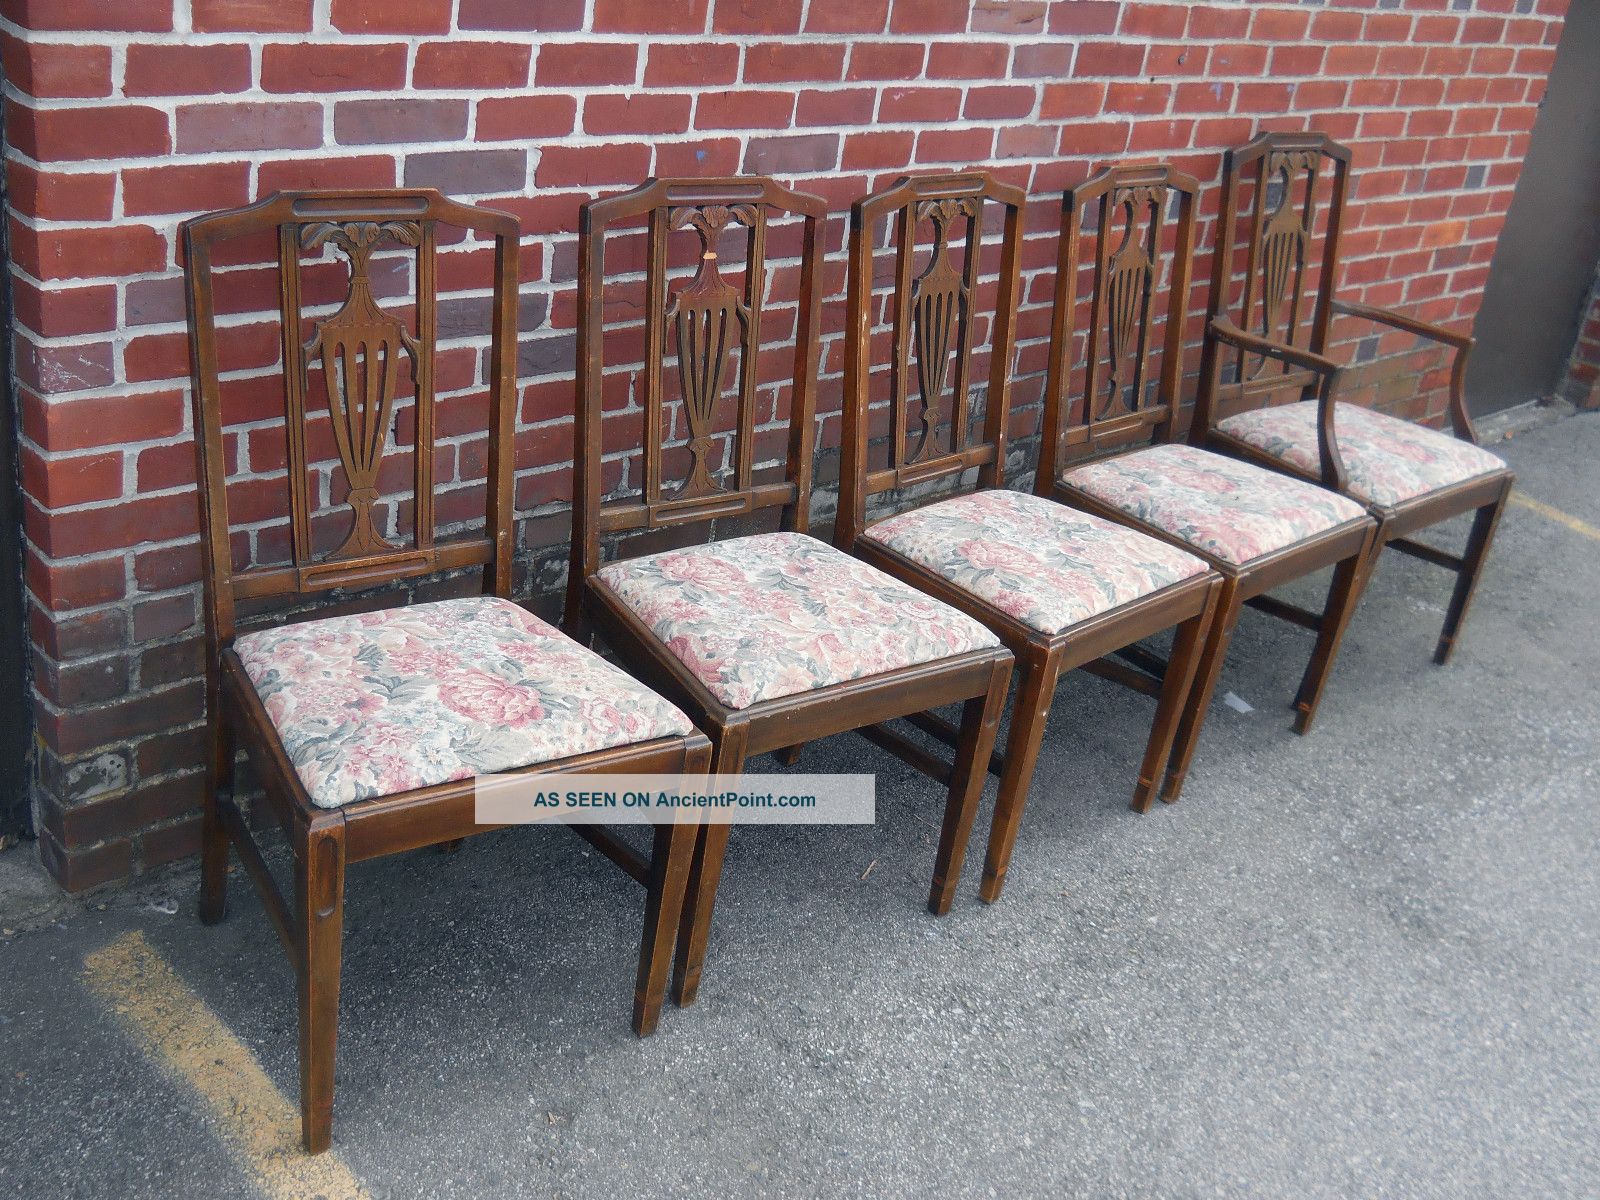 Dauler Vintage Antique Dining Room Kitchen Set Chairs Furniture Quality Inlaid 1900-1950 photo